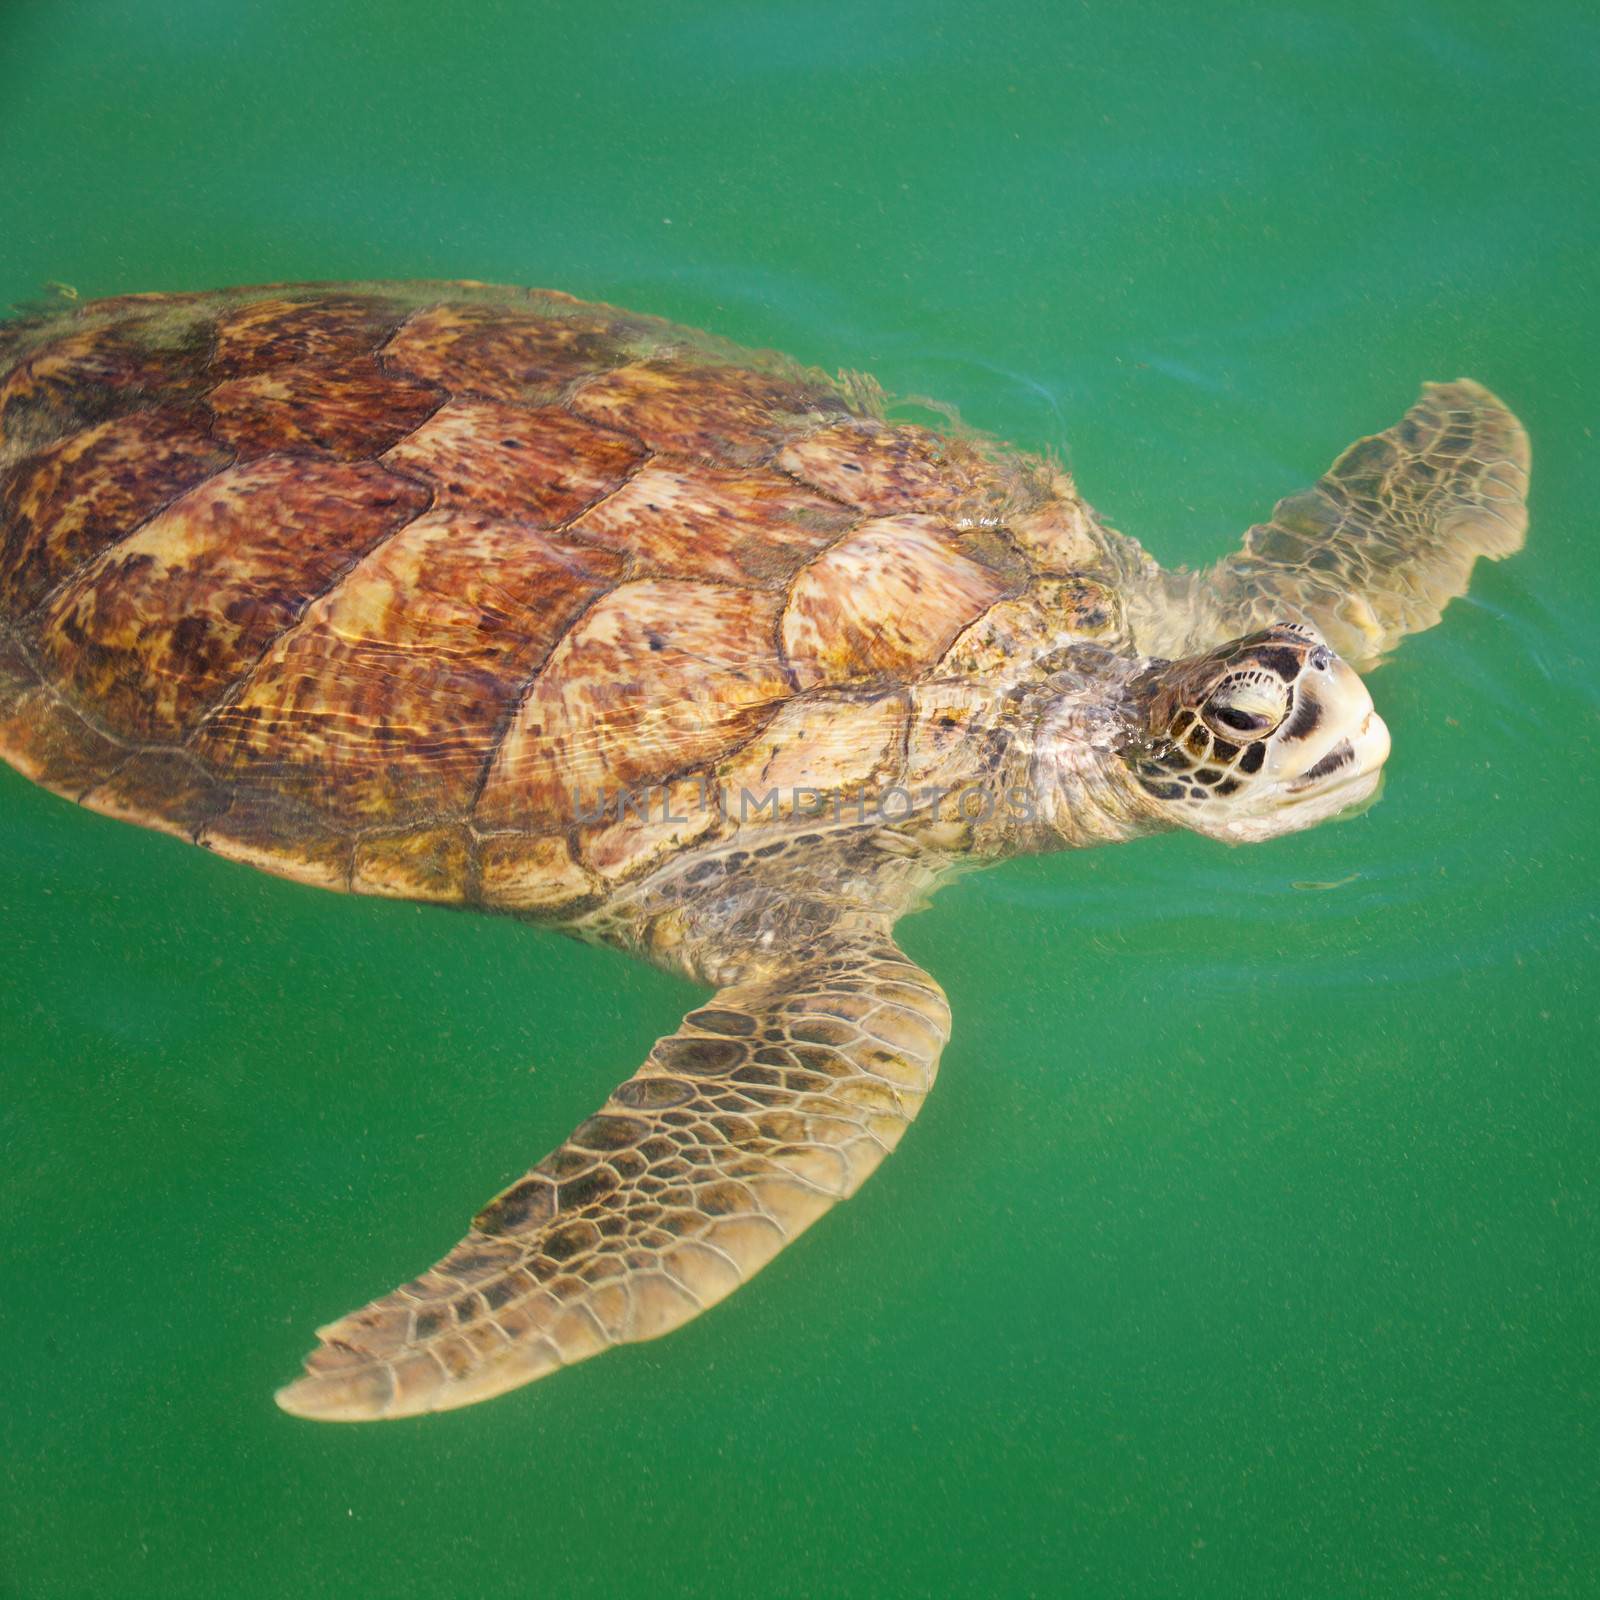 Large Carribean Sea Turtle at the surface of the ocean